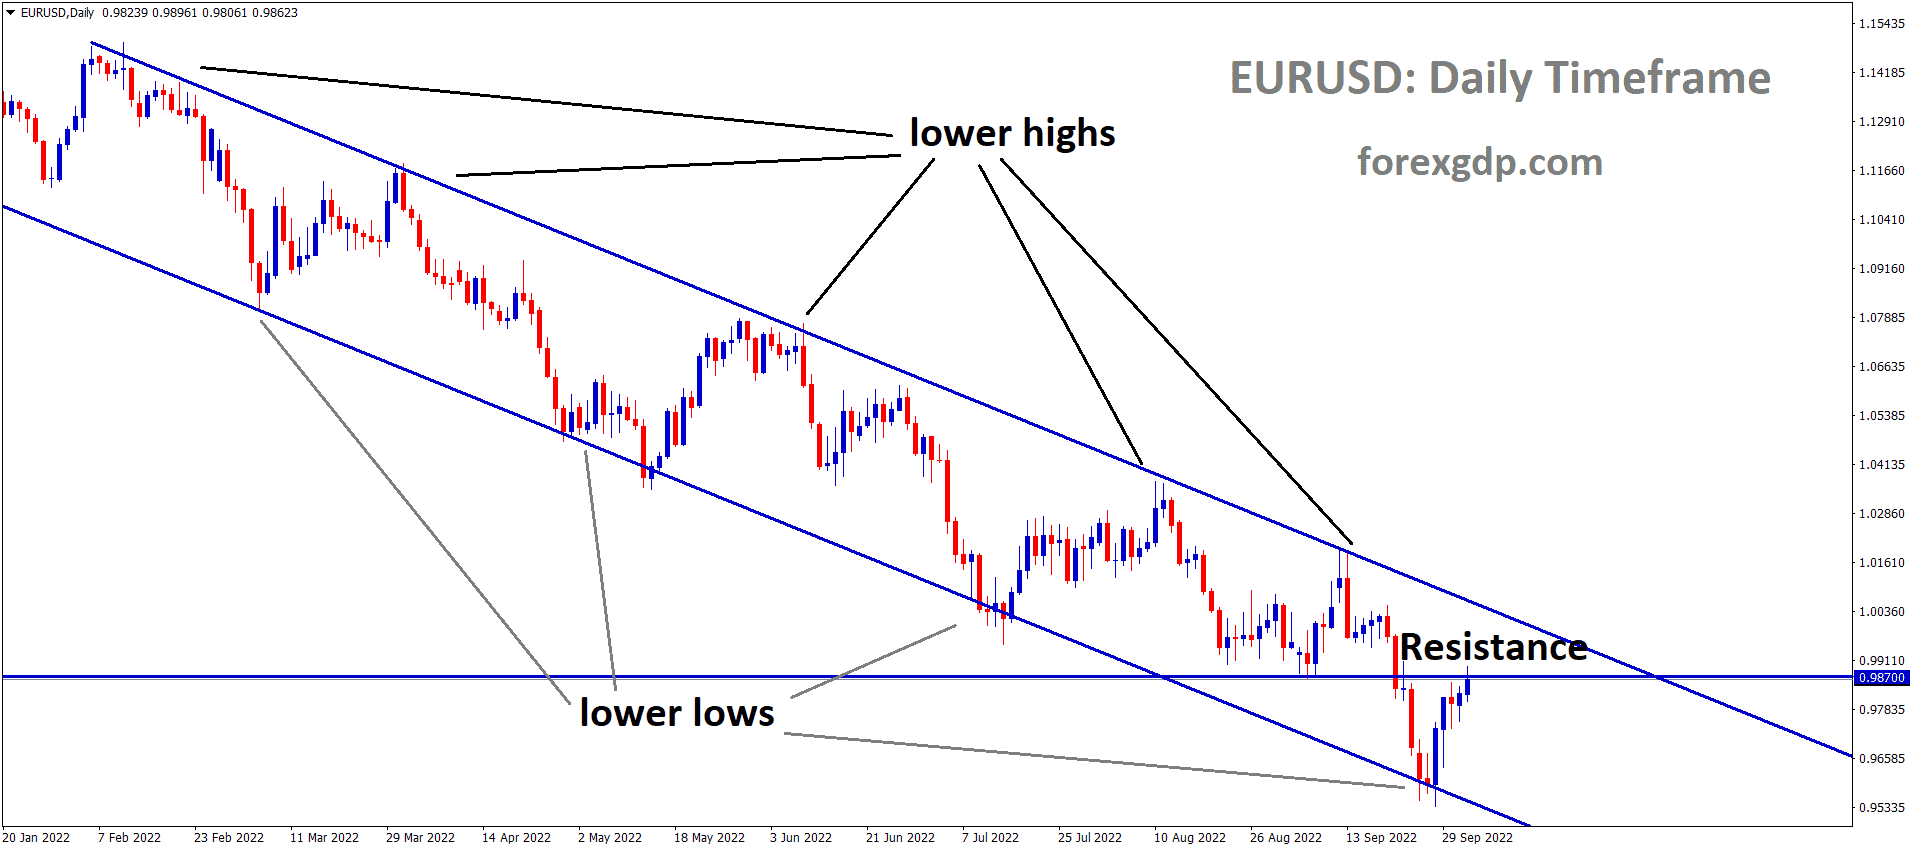 EURUSD is moving in the descending channel and the market has rebounded from the lower low area and reached the Resistance area of the channel